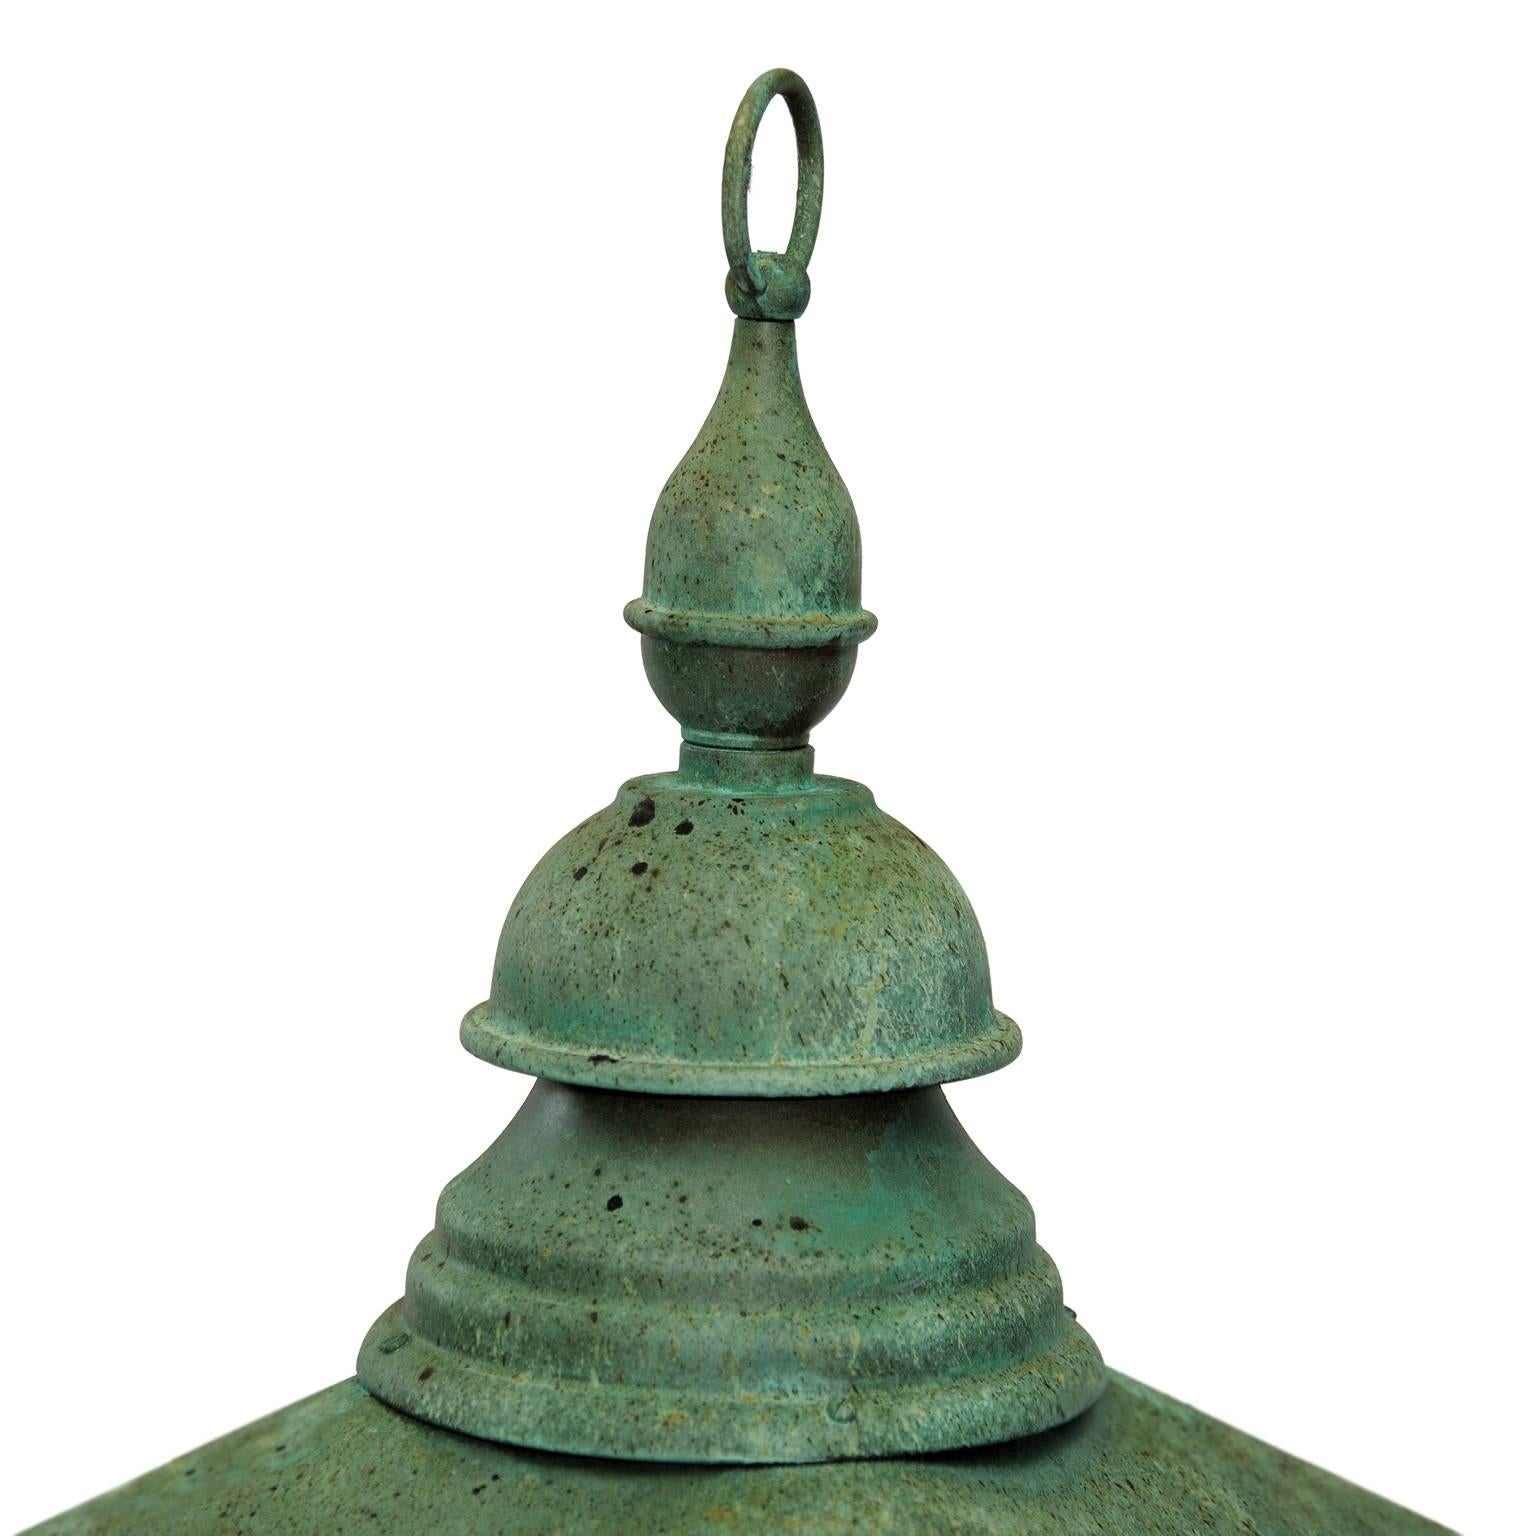 This is a beautifully charismatic English mid-19th century verdigris bronze Hanging Lantern, now converted to electricity, suitable for interior or exterior use. Complete with brass makers name plate, Stanstead Abbotts, D. W. WINDSOR, Hearts